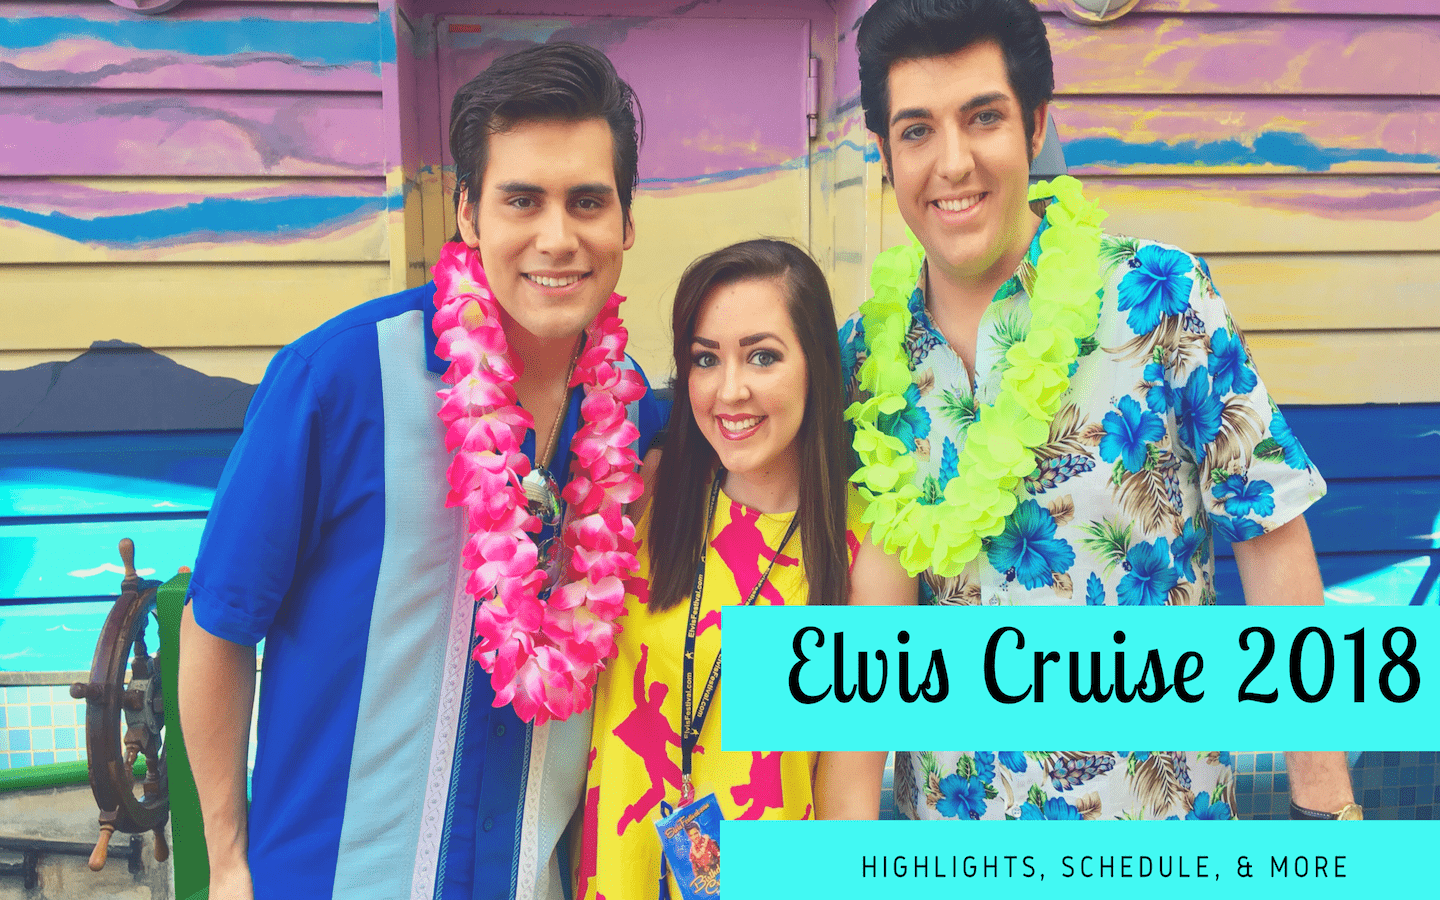 Elvis Birthday Cruise 2018 - Highlights, Schedule, and MORE!